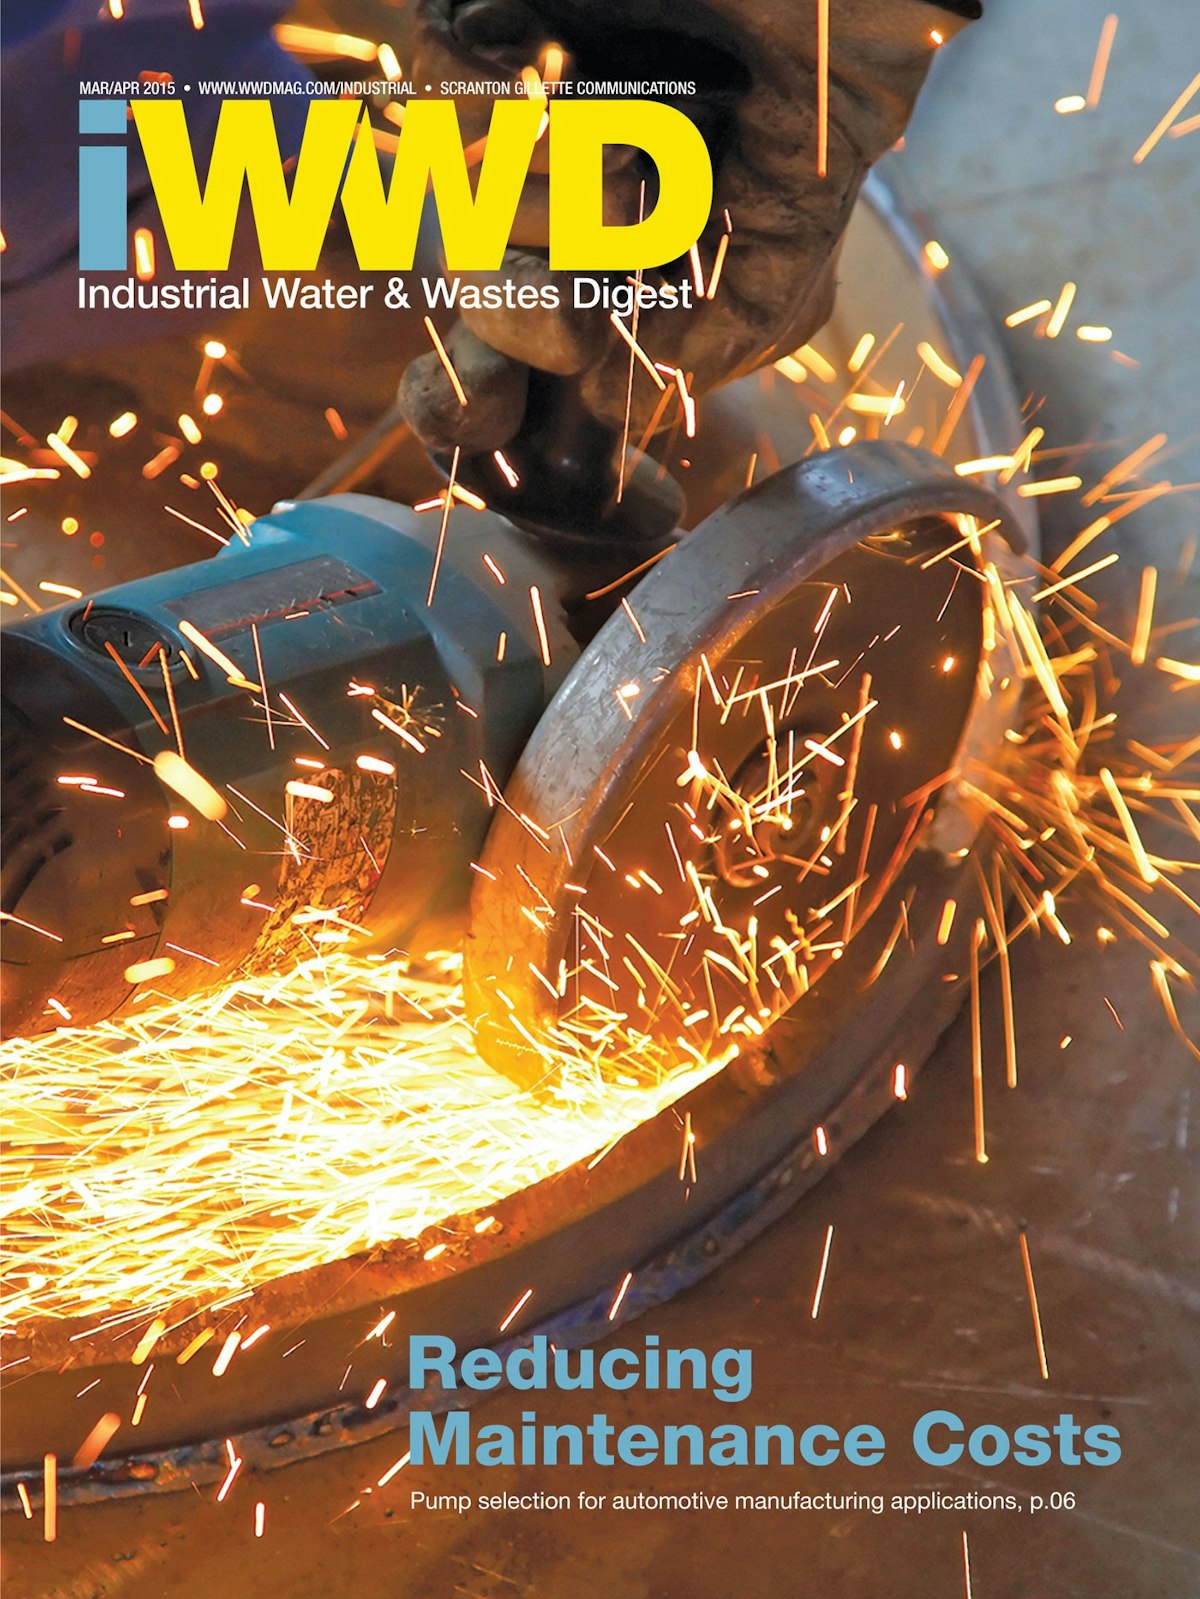 iWWD March/April 2015 cover image